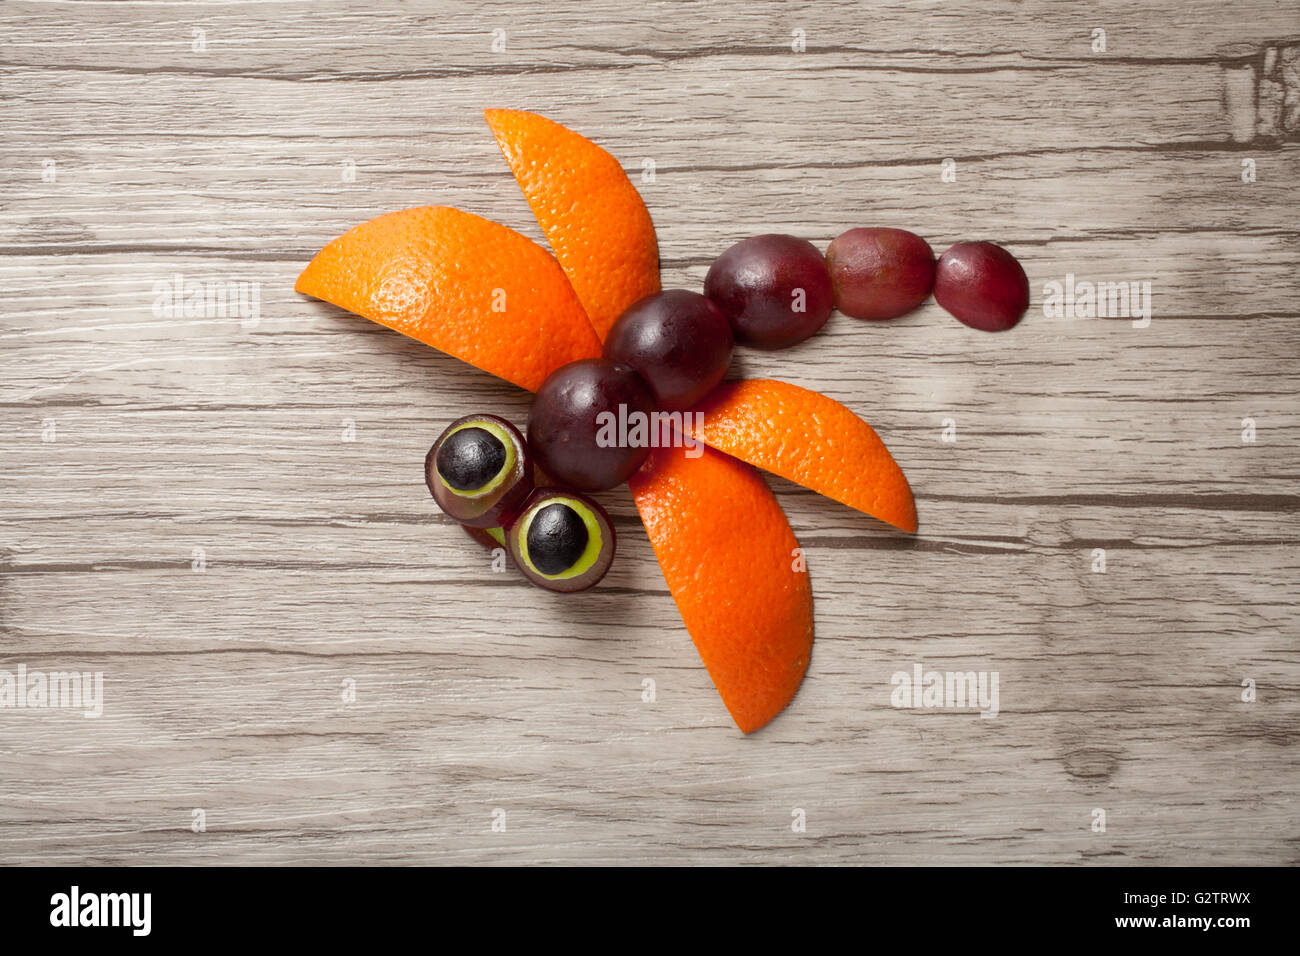 Funny dragonfly made of fruits on board Stock Photo